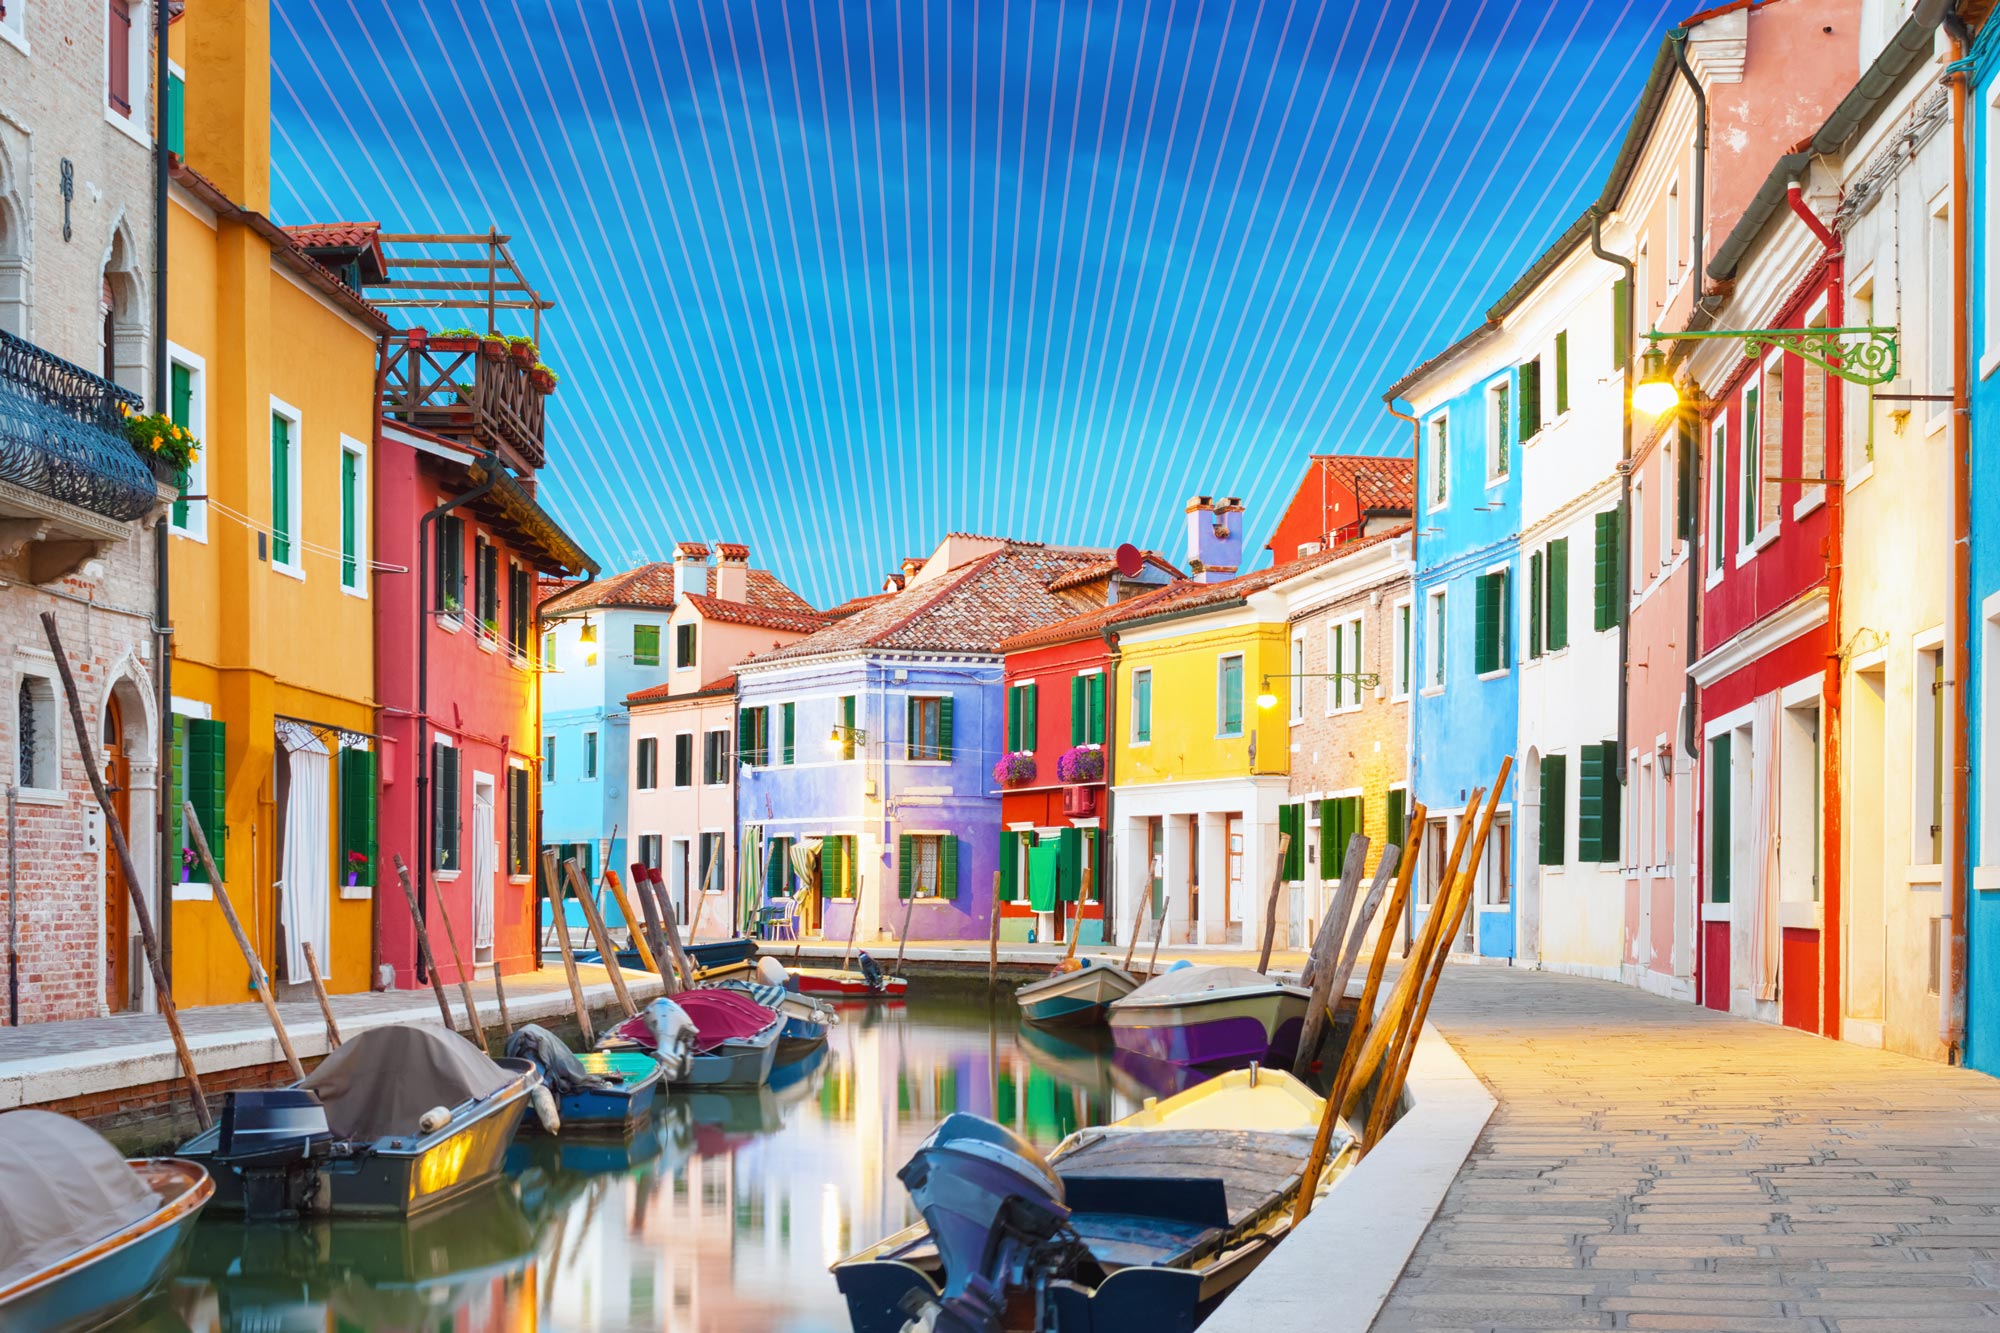 Buildings in various colors with boats in the water in Venice Italy